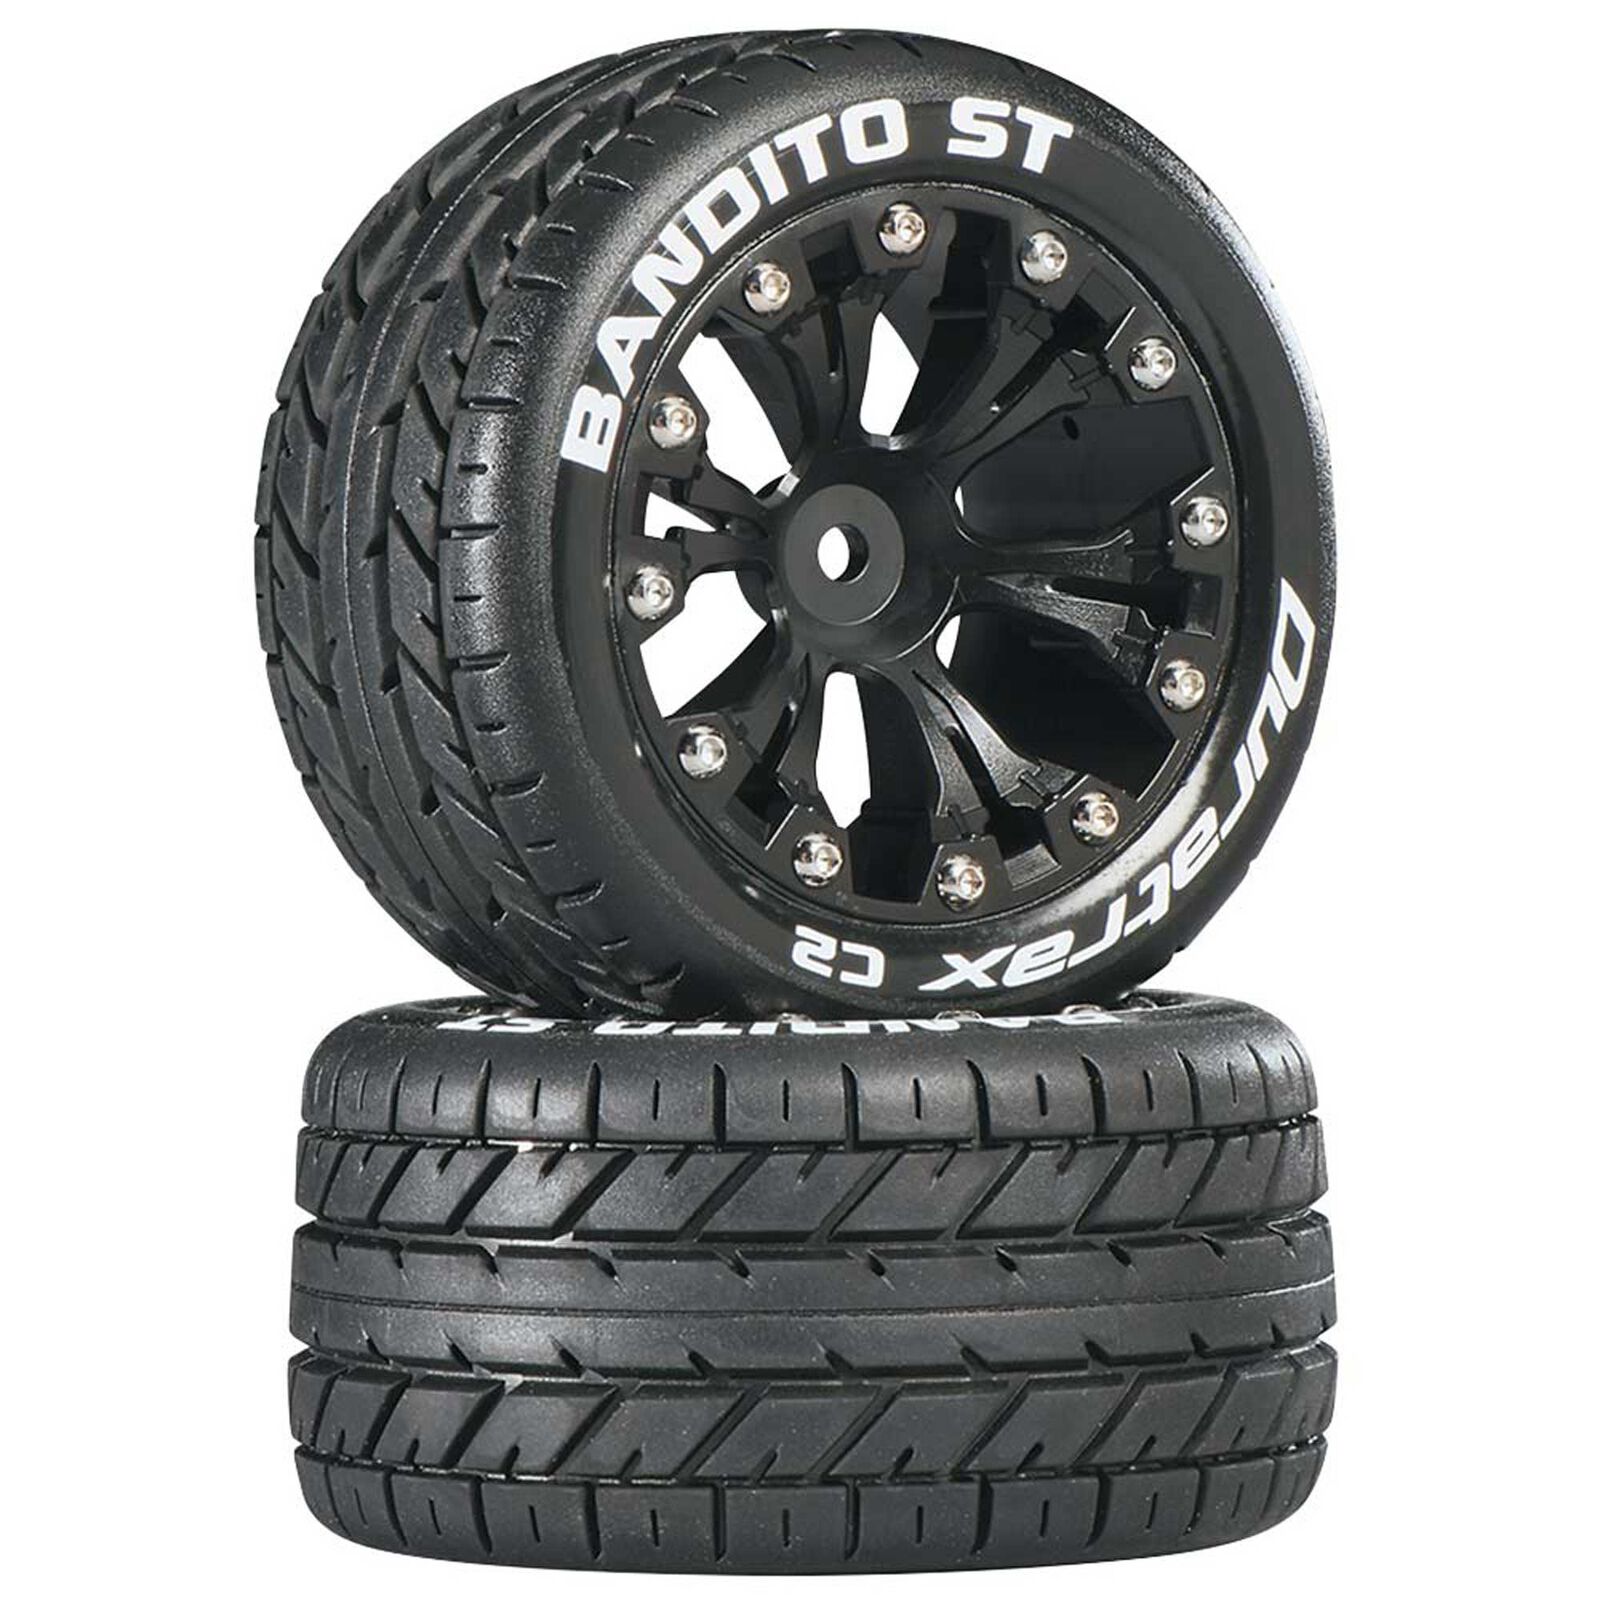 Bandito ST 2.8" 2WD Mounted Rear C2 Tires, Black (2)